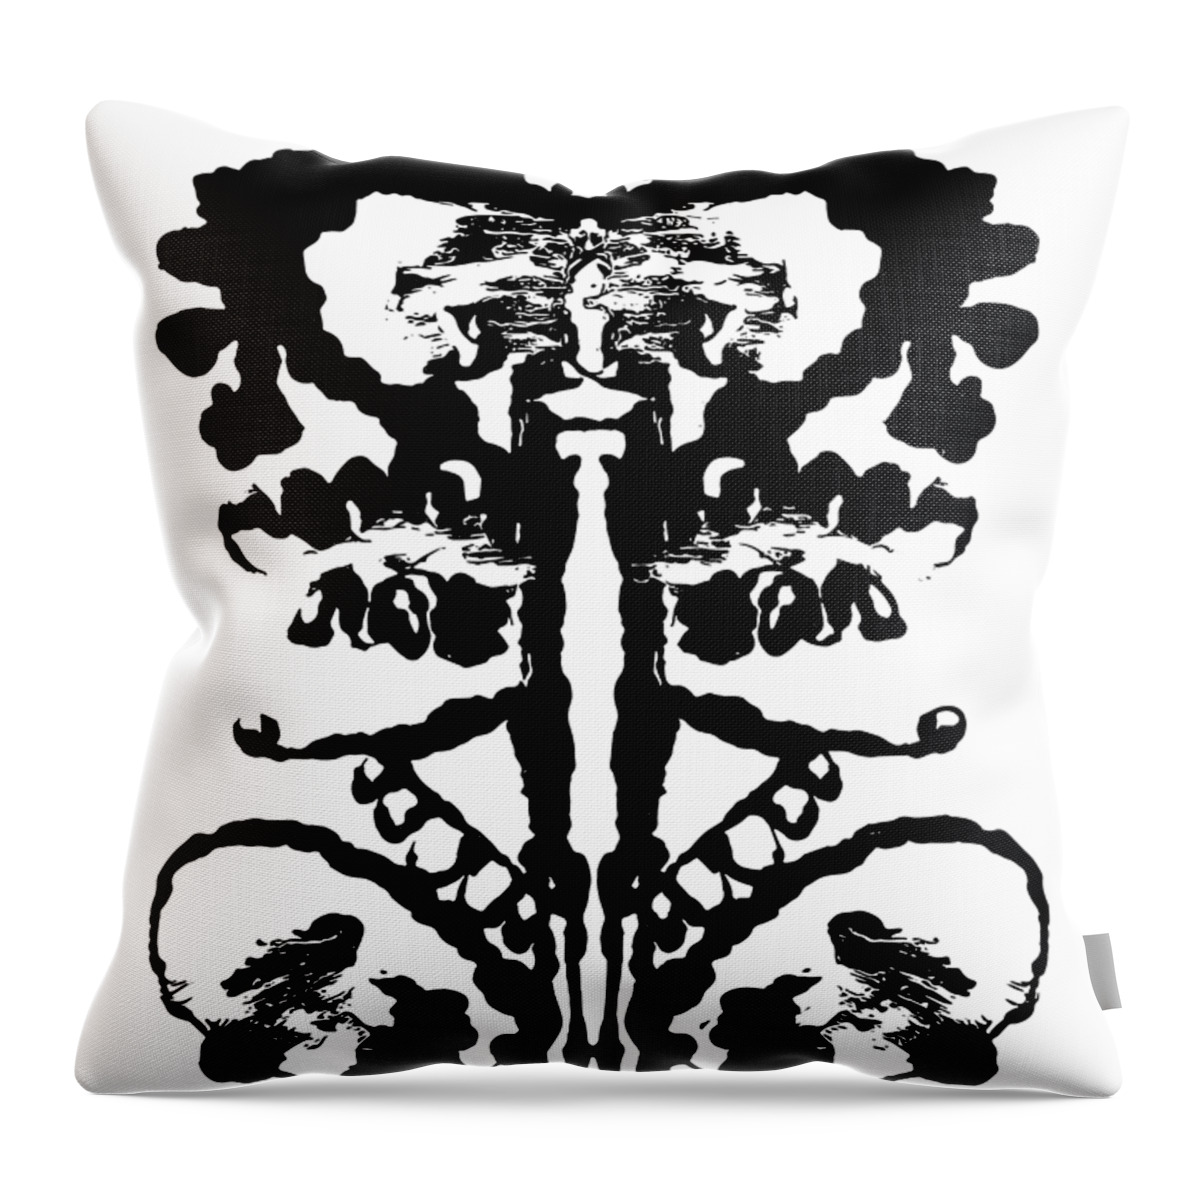 Statement Throw Pillow featuring the painting Dream Weaver by Stephenie Zagorski